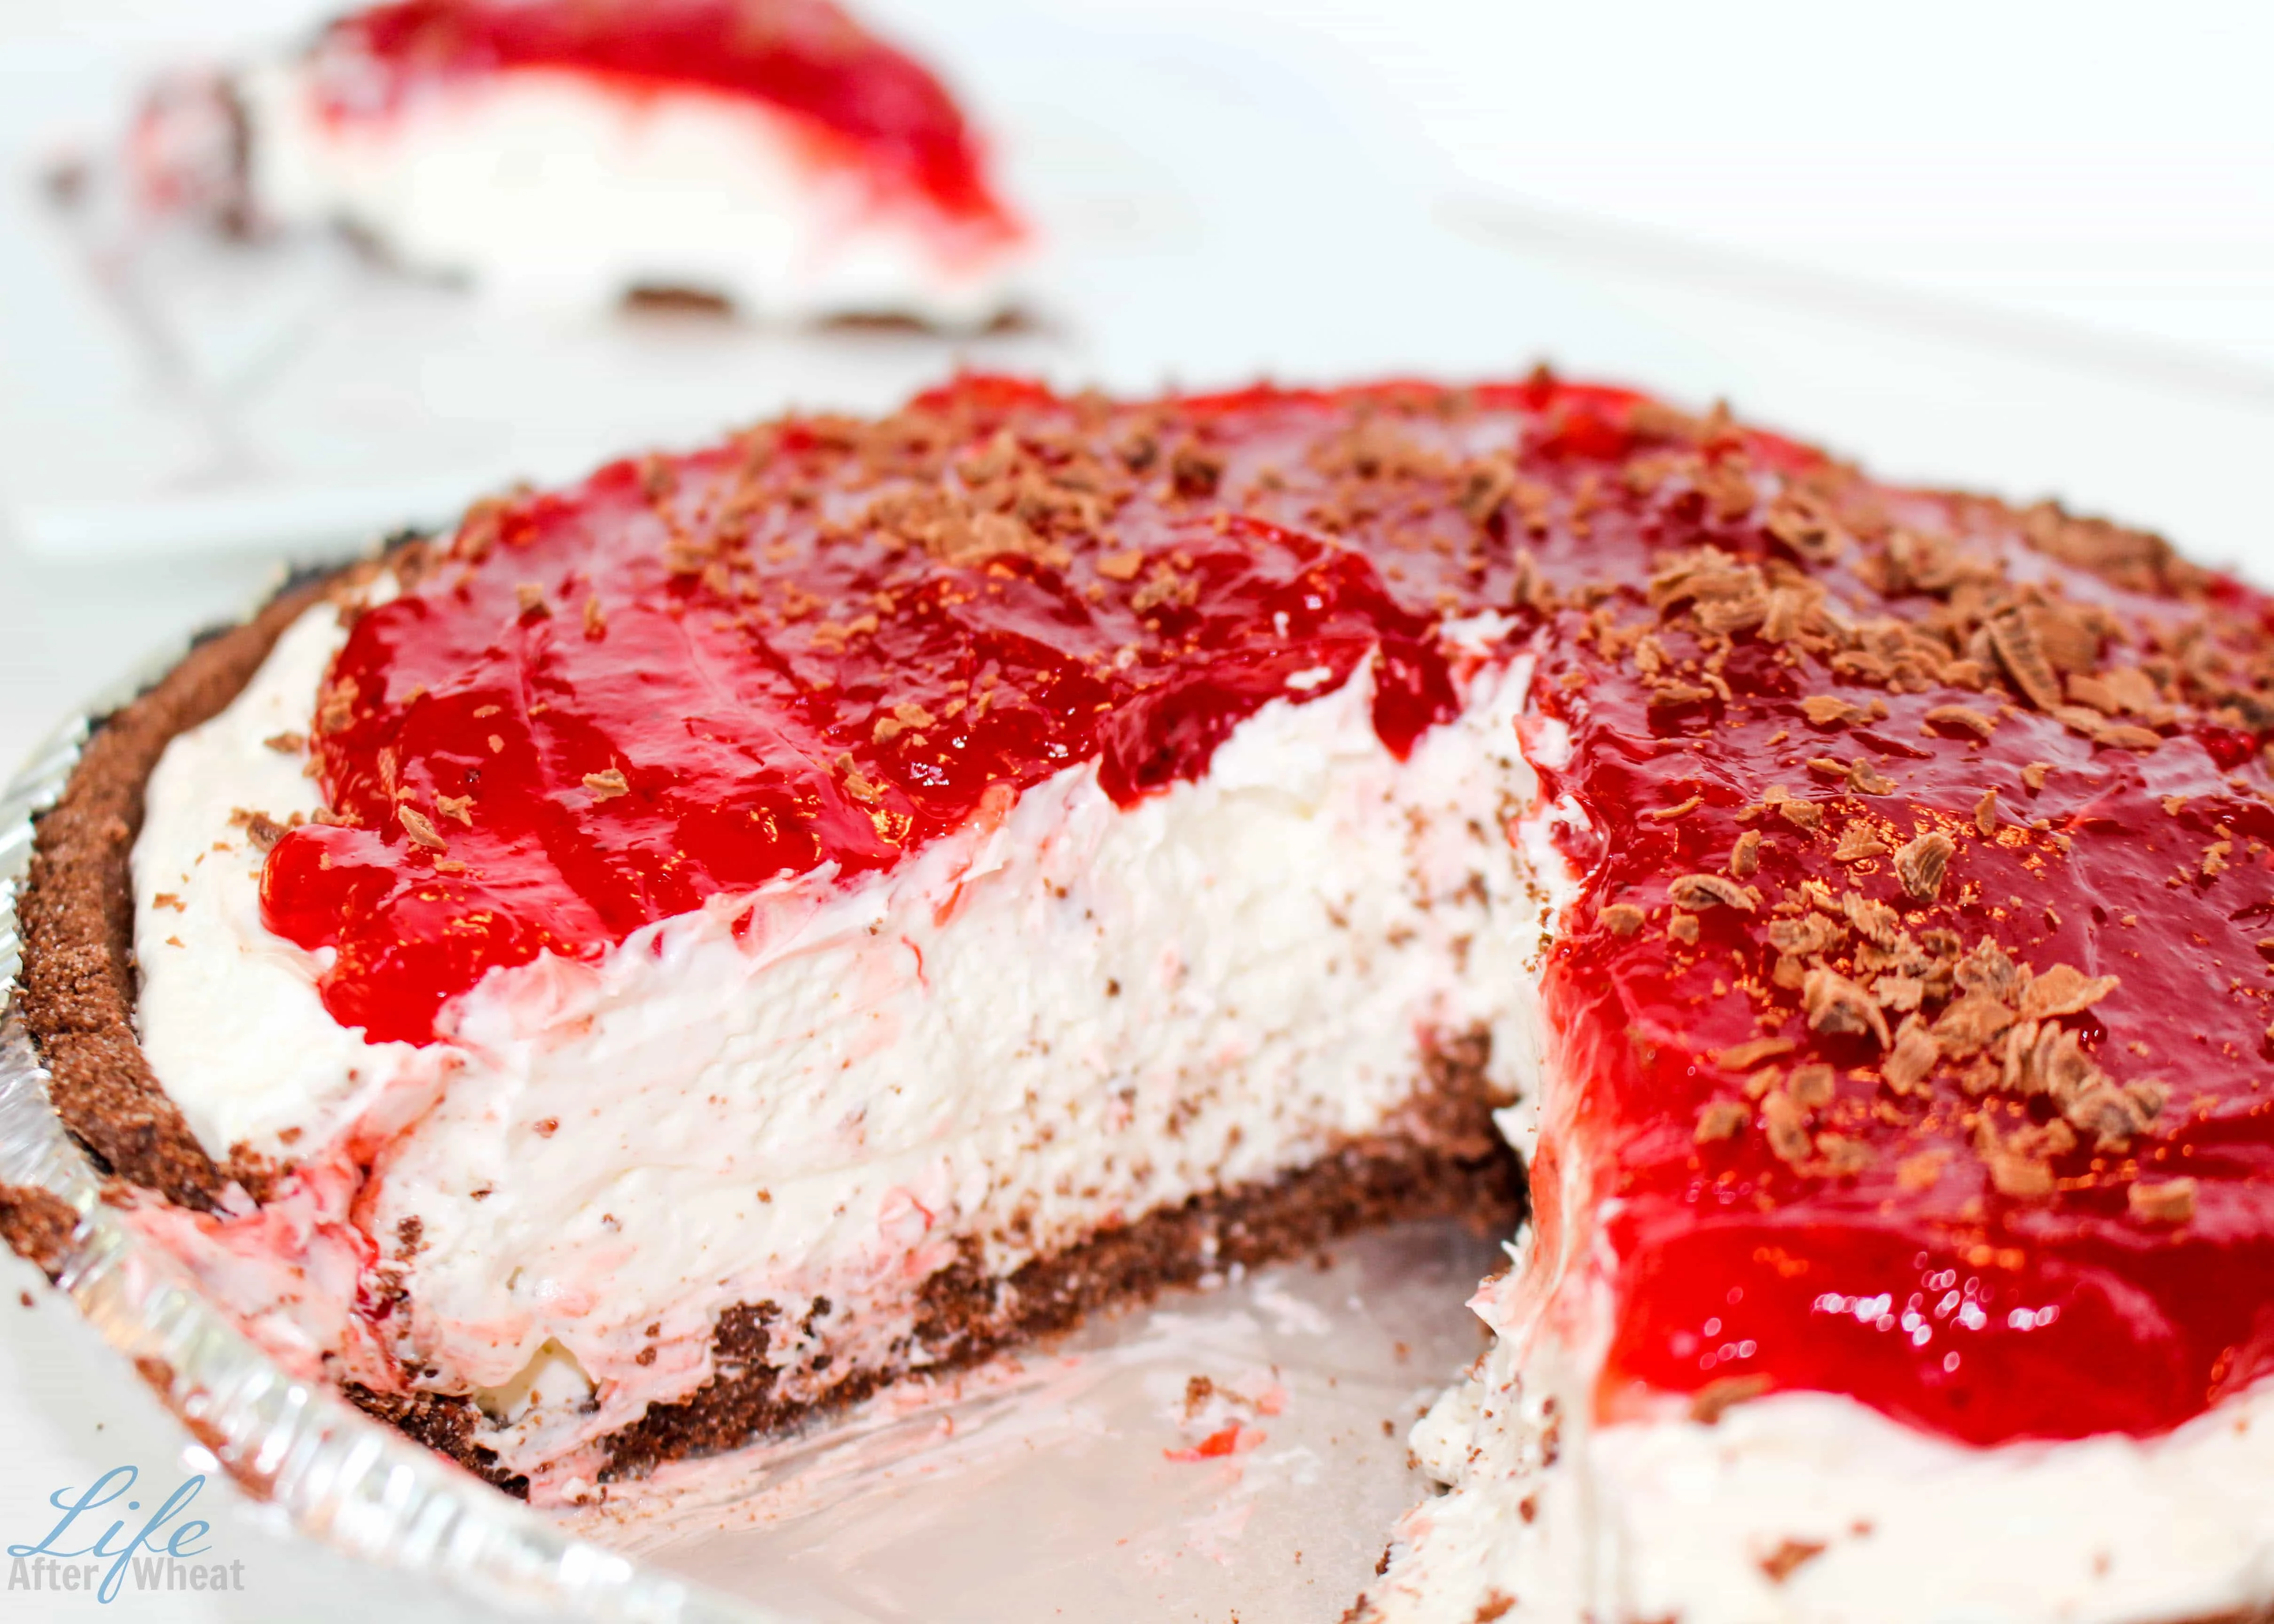 Gluten Free Black Bottom Cheesecake: A sinfully decadent dessert that is simple to make (no-bake!) and features layers of crisp chocolate, tangy cheesecake, and a sweet berry topping of your choosing.